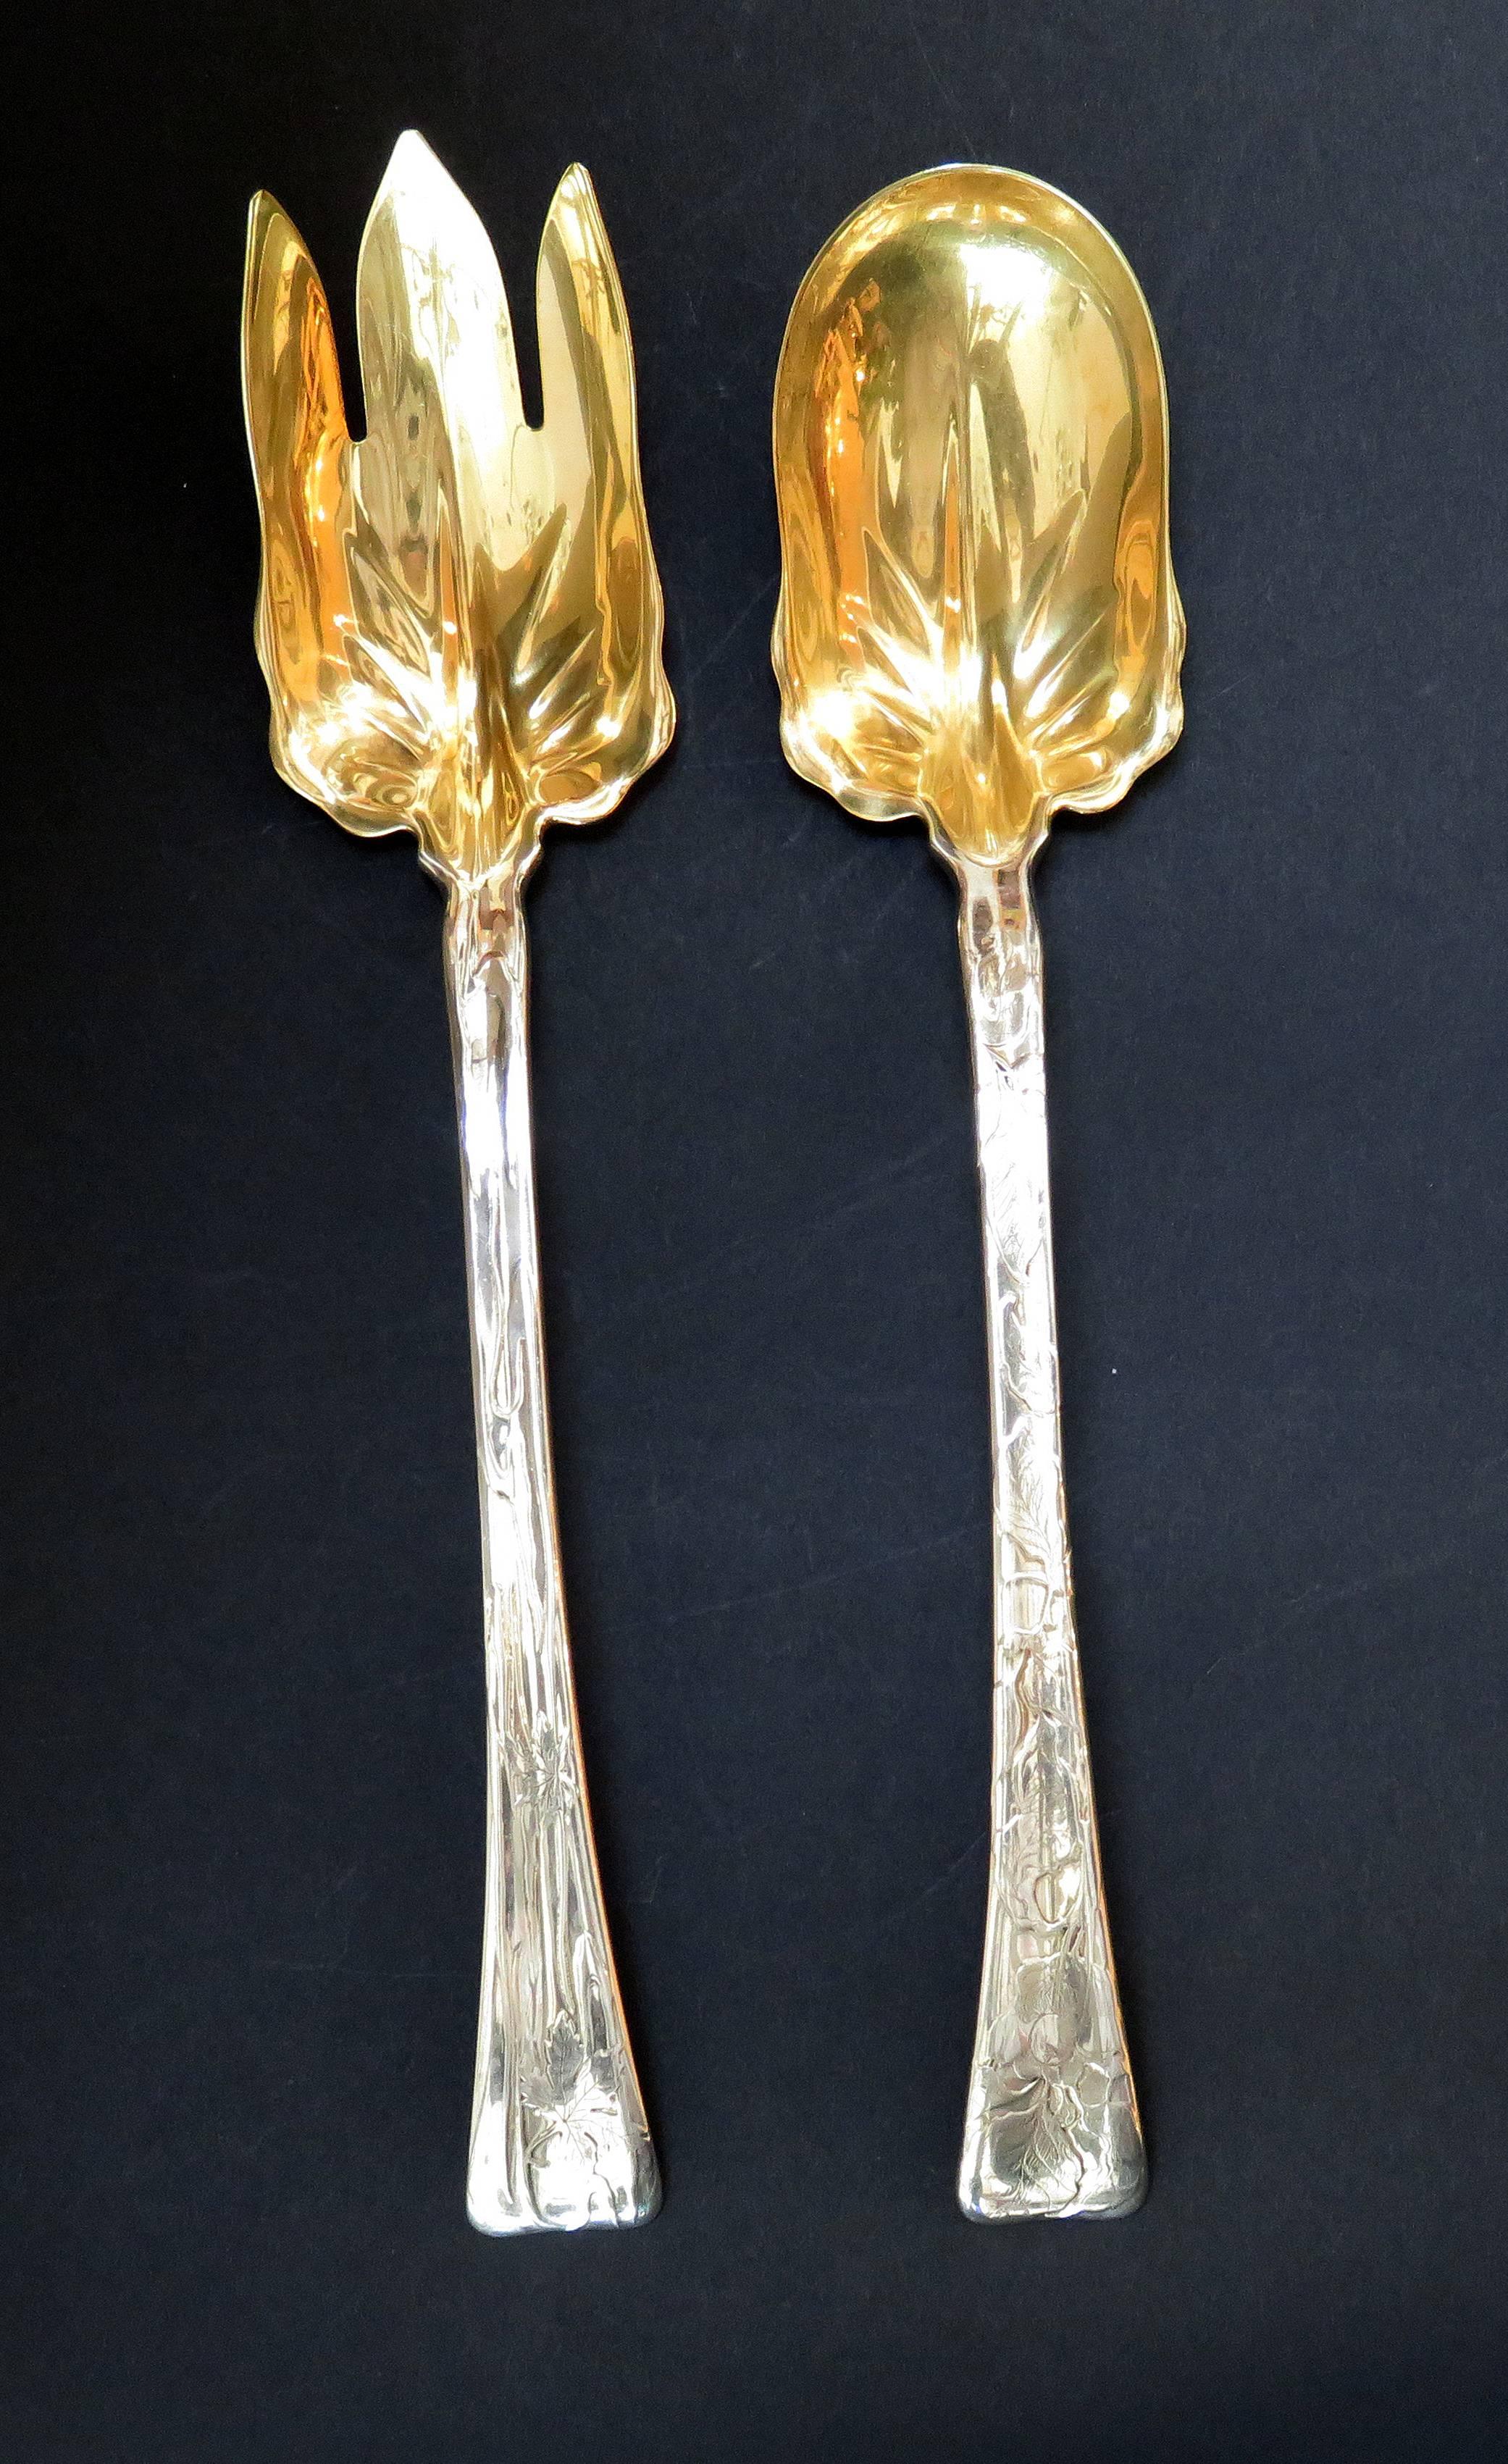 A Tiffany and Company lap over edge acid etched salad fork and spoon. Both the fork and the spoon have a gilt bowl. The fork is etched with maple leaves and the spoon is etched with leaves. The is a monogram on each piece of a 